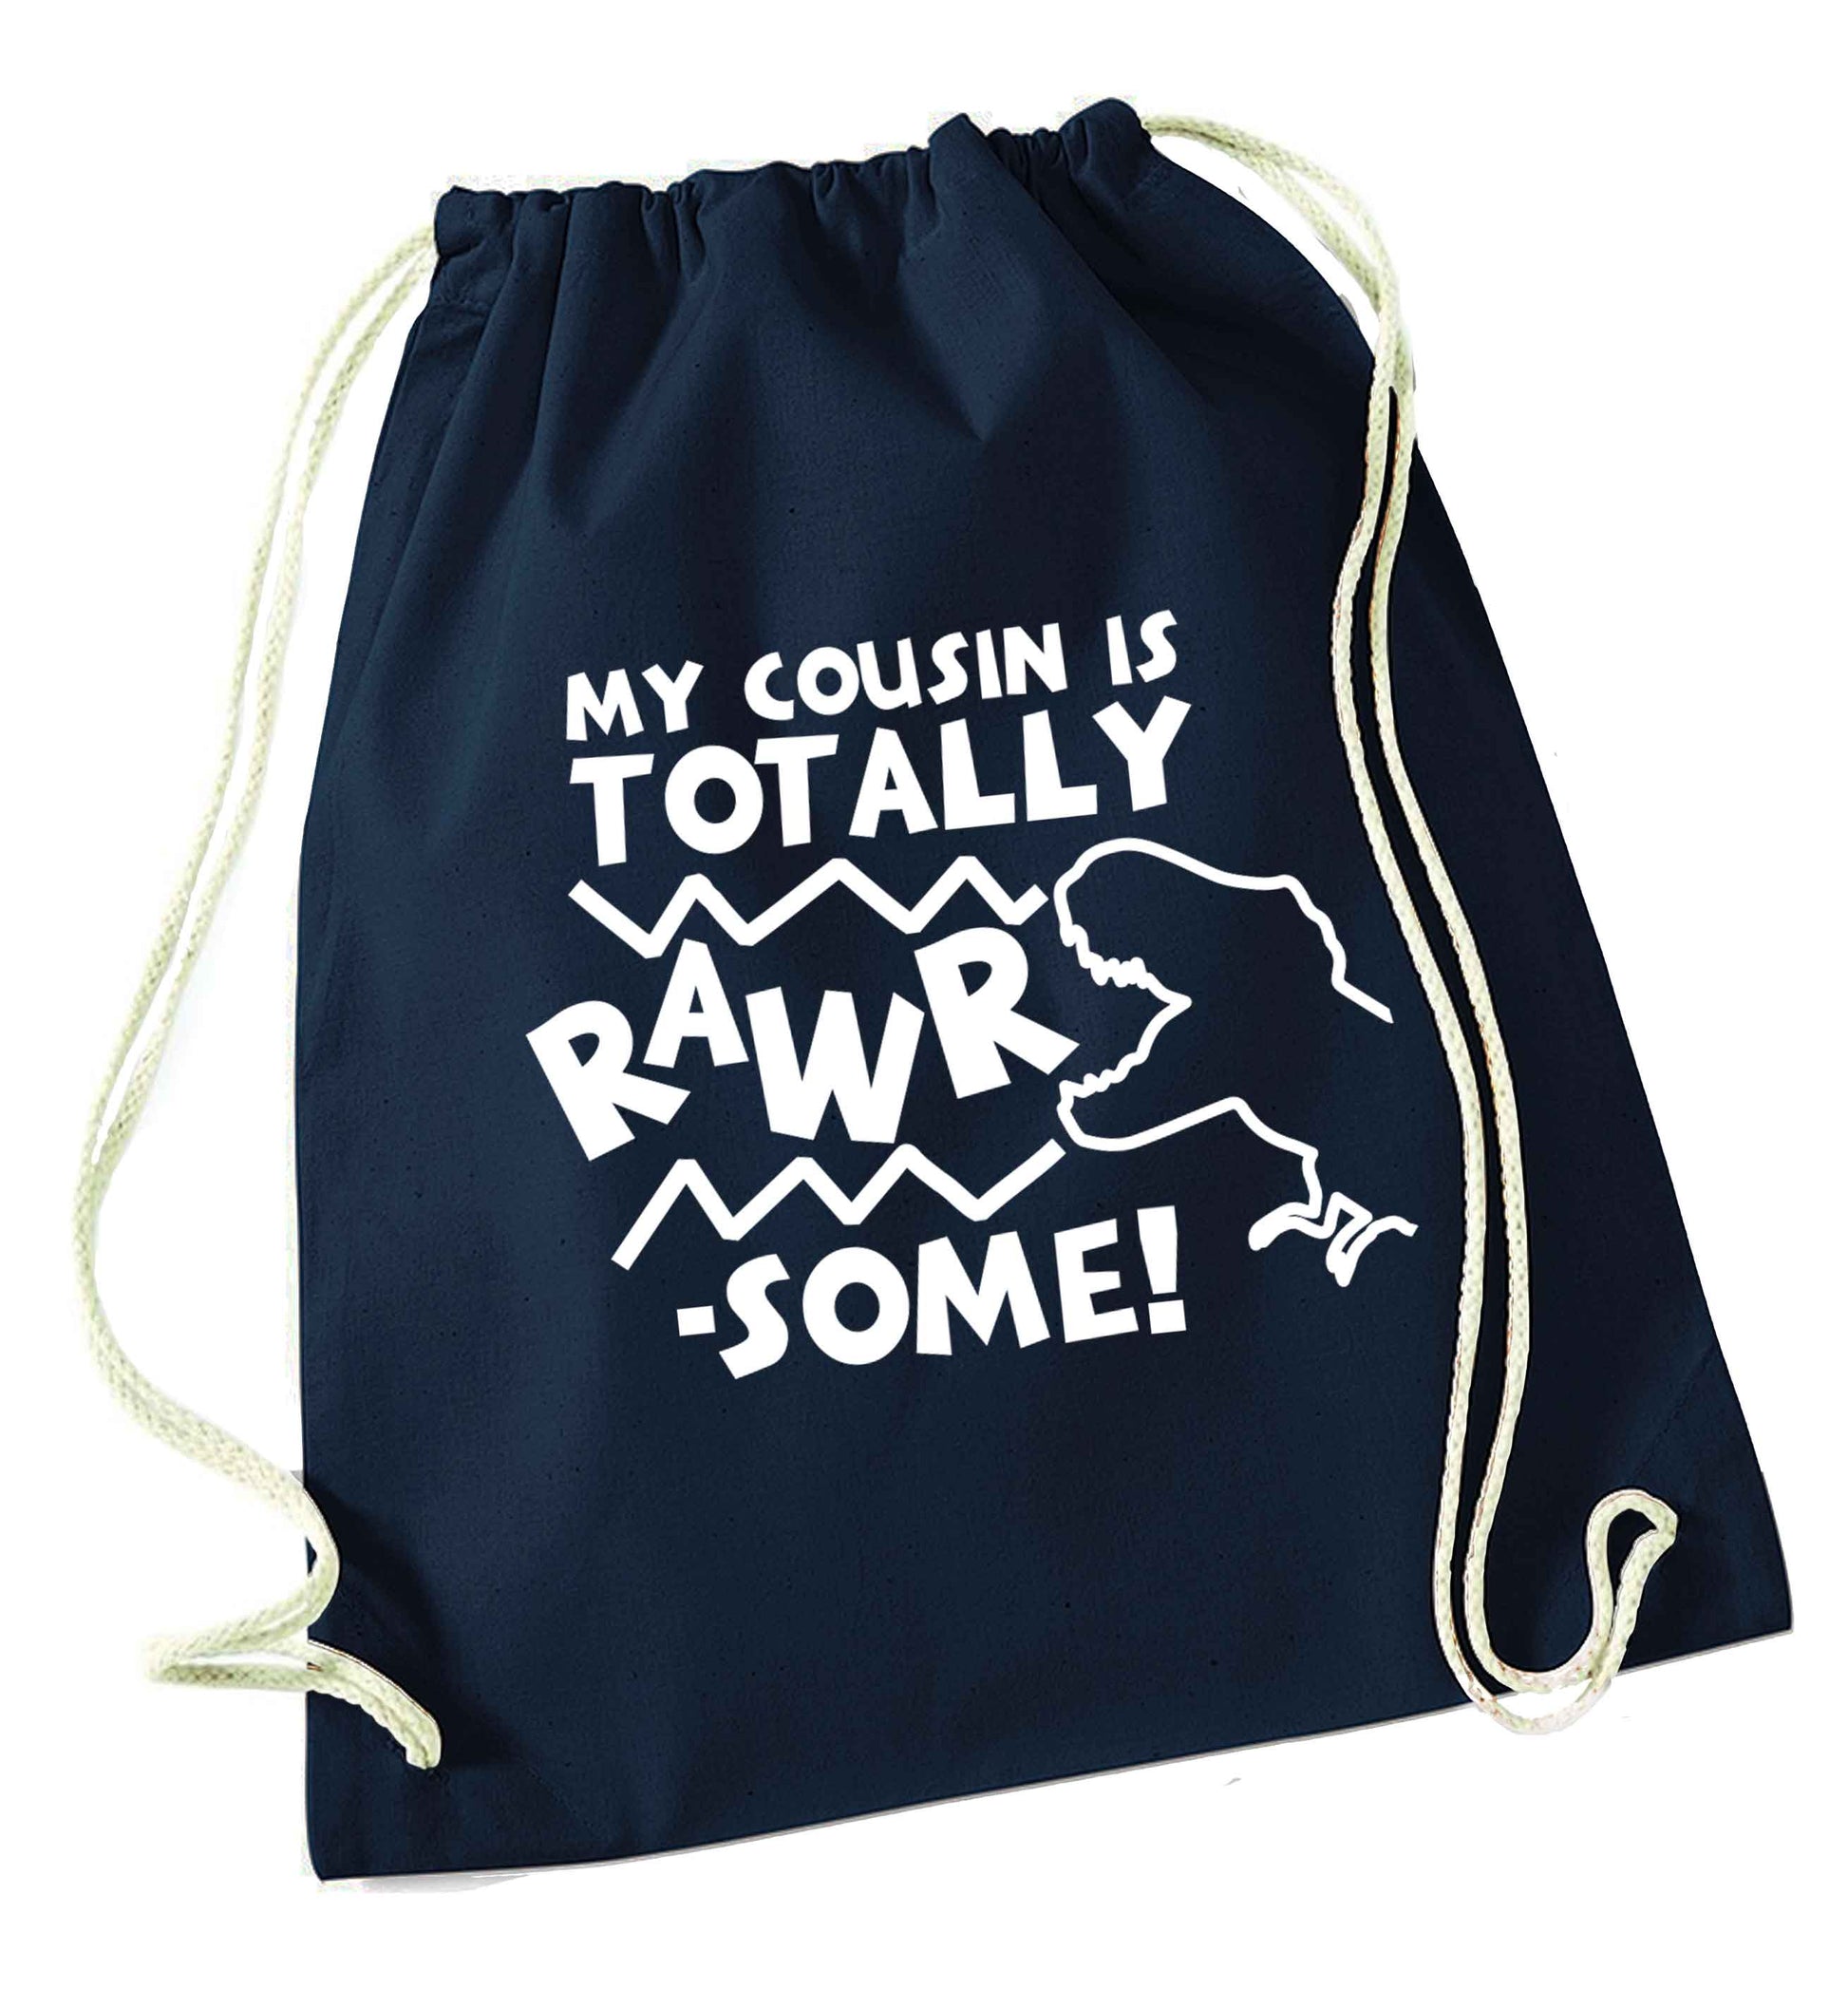 My cousin is totally rawrsome navy drawstring bag